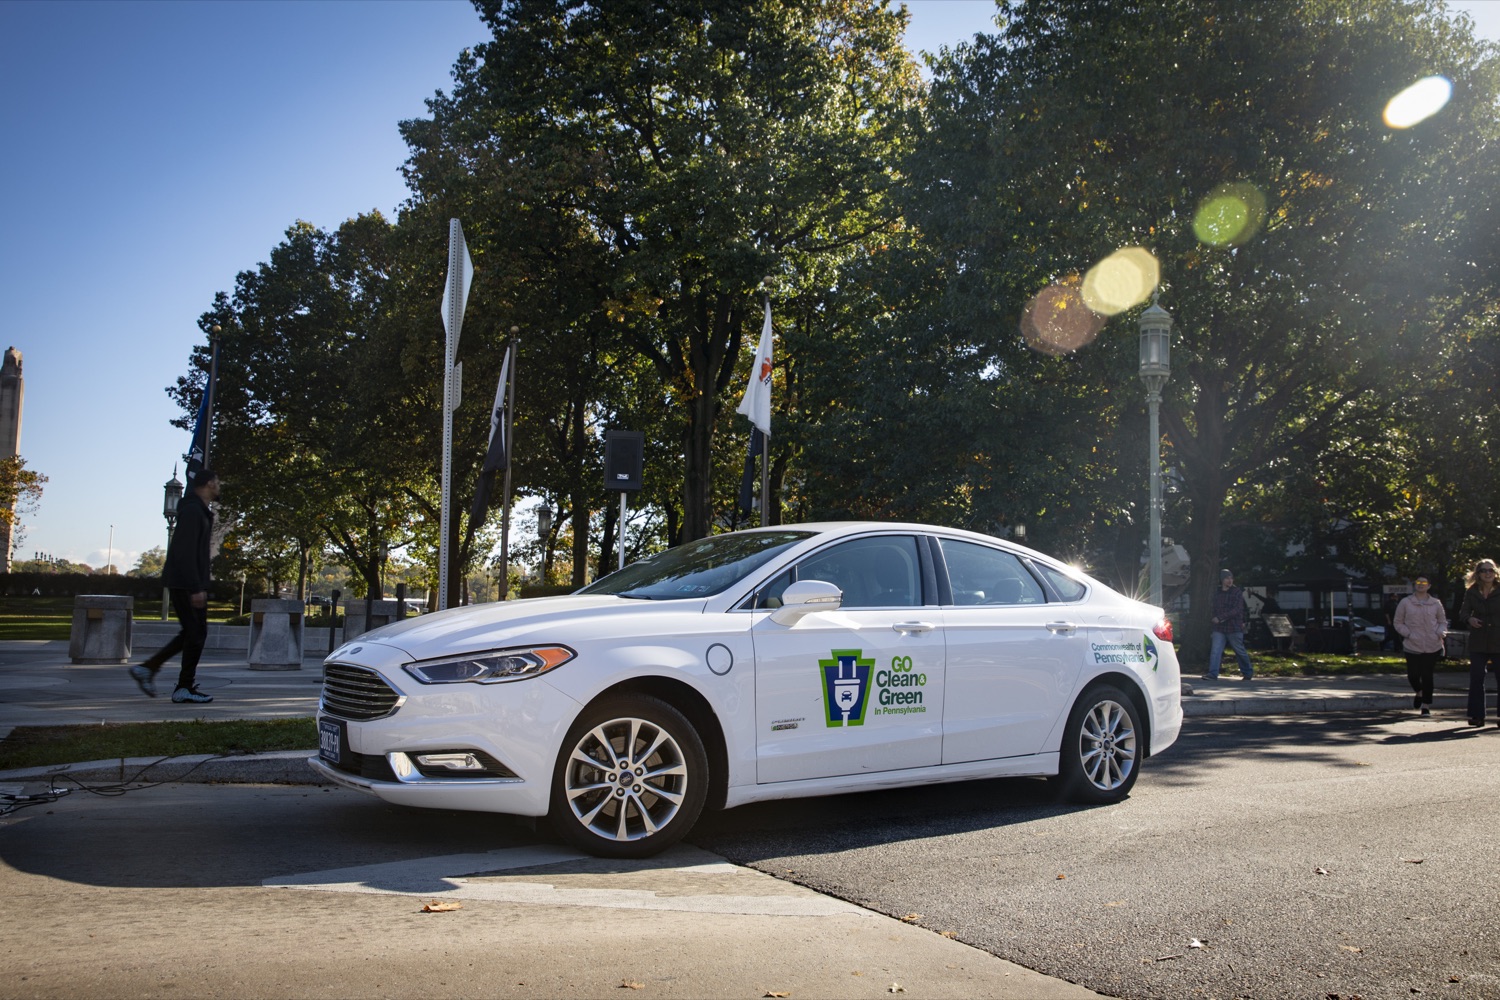 The Drive Electric PA Coalition and the interagency GreenGov Council hold an interactive display of electric and hybrid vehicles during a Ride & Drive Event at the Capitol Complex on October 23, 2019.<br><a href="https://filesource.amperwave.net/commonwealthofpa/photo/17449_DGS_DRIVE_ELECTRIC_CZ_03.JPG" target="_blank">⇣ Download Photo</a>